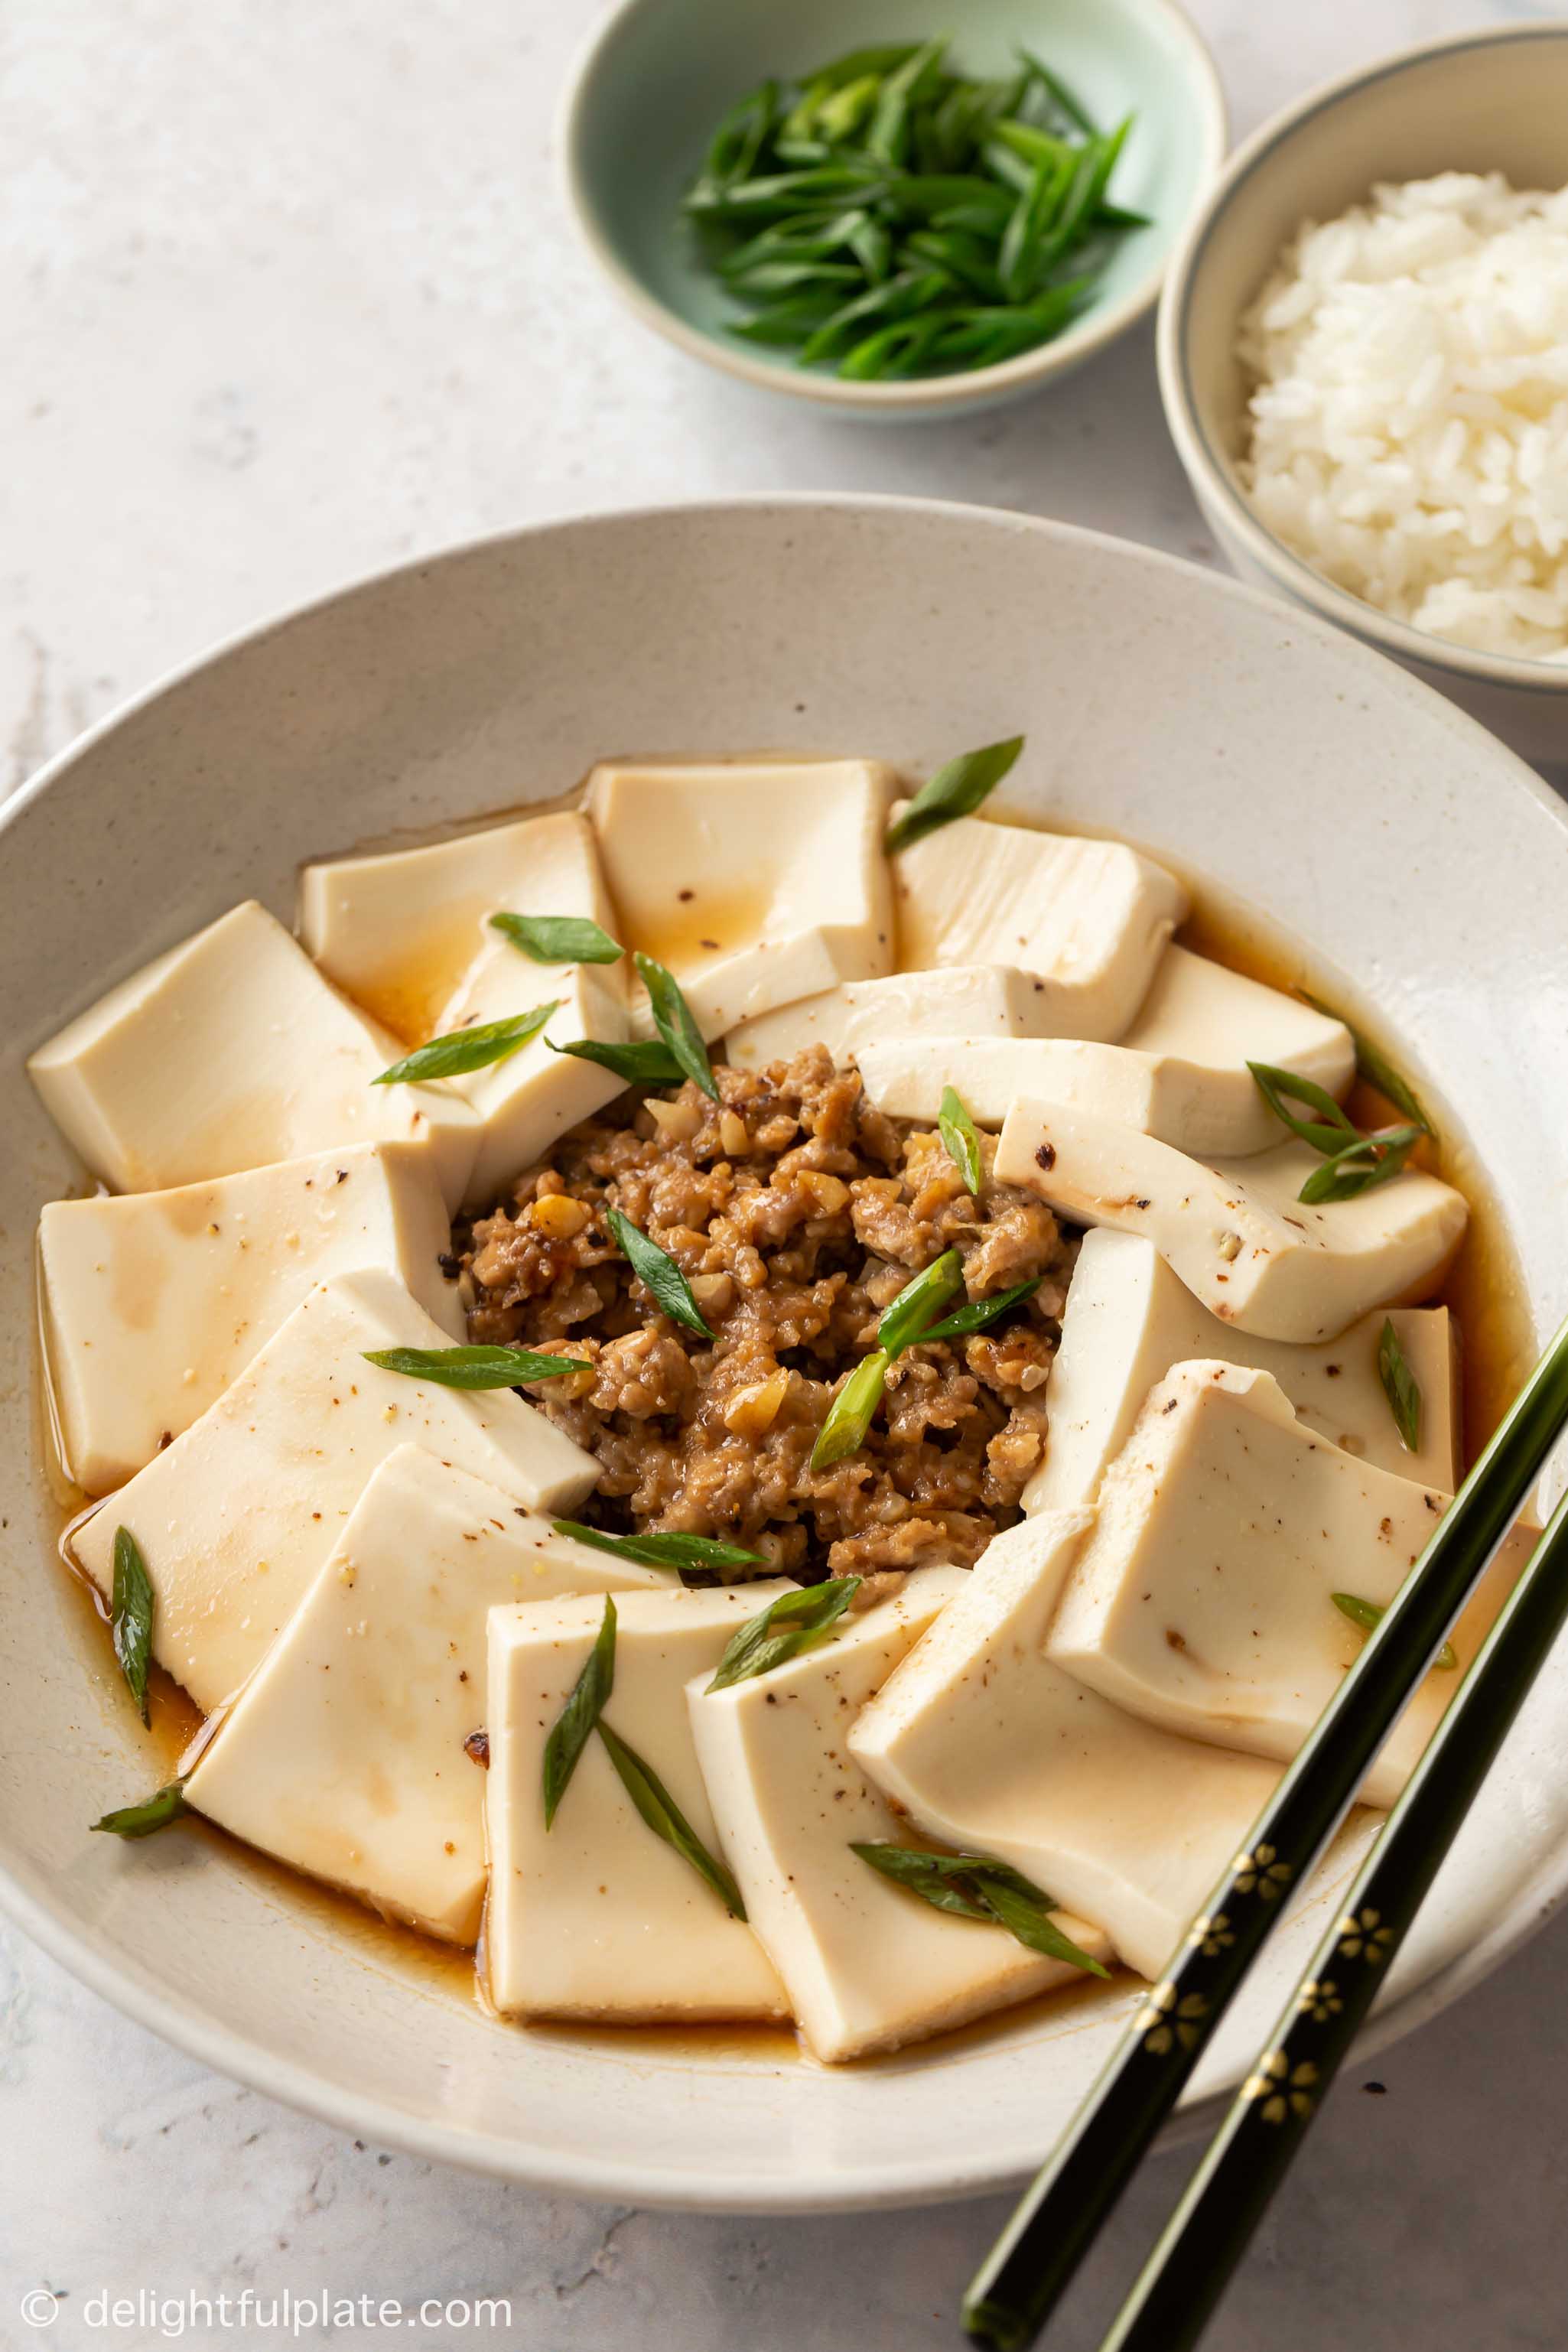 a plate of steamed tofu and ground pork, served with rice on the side